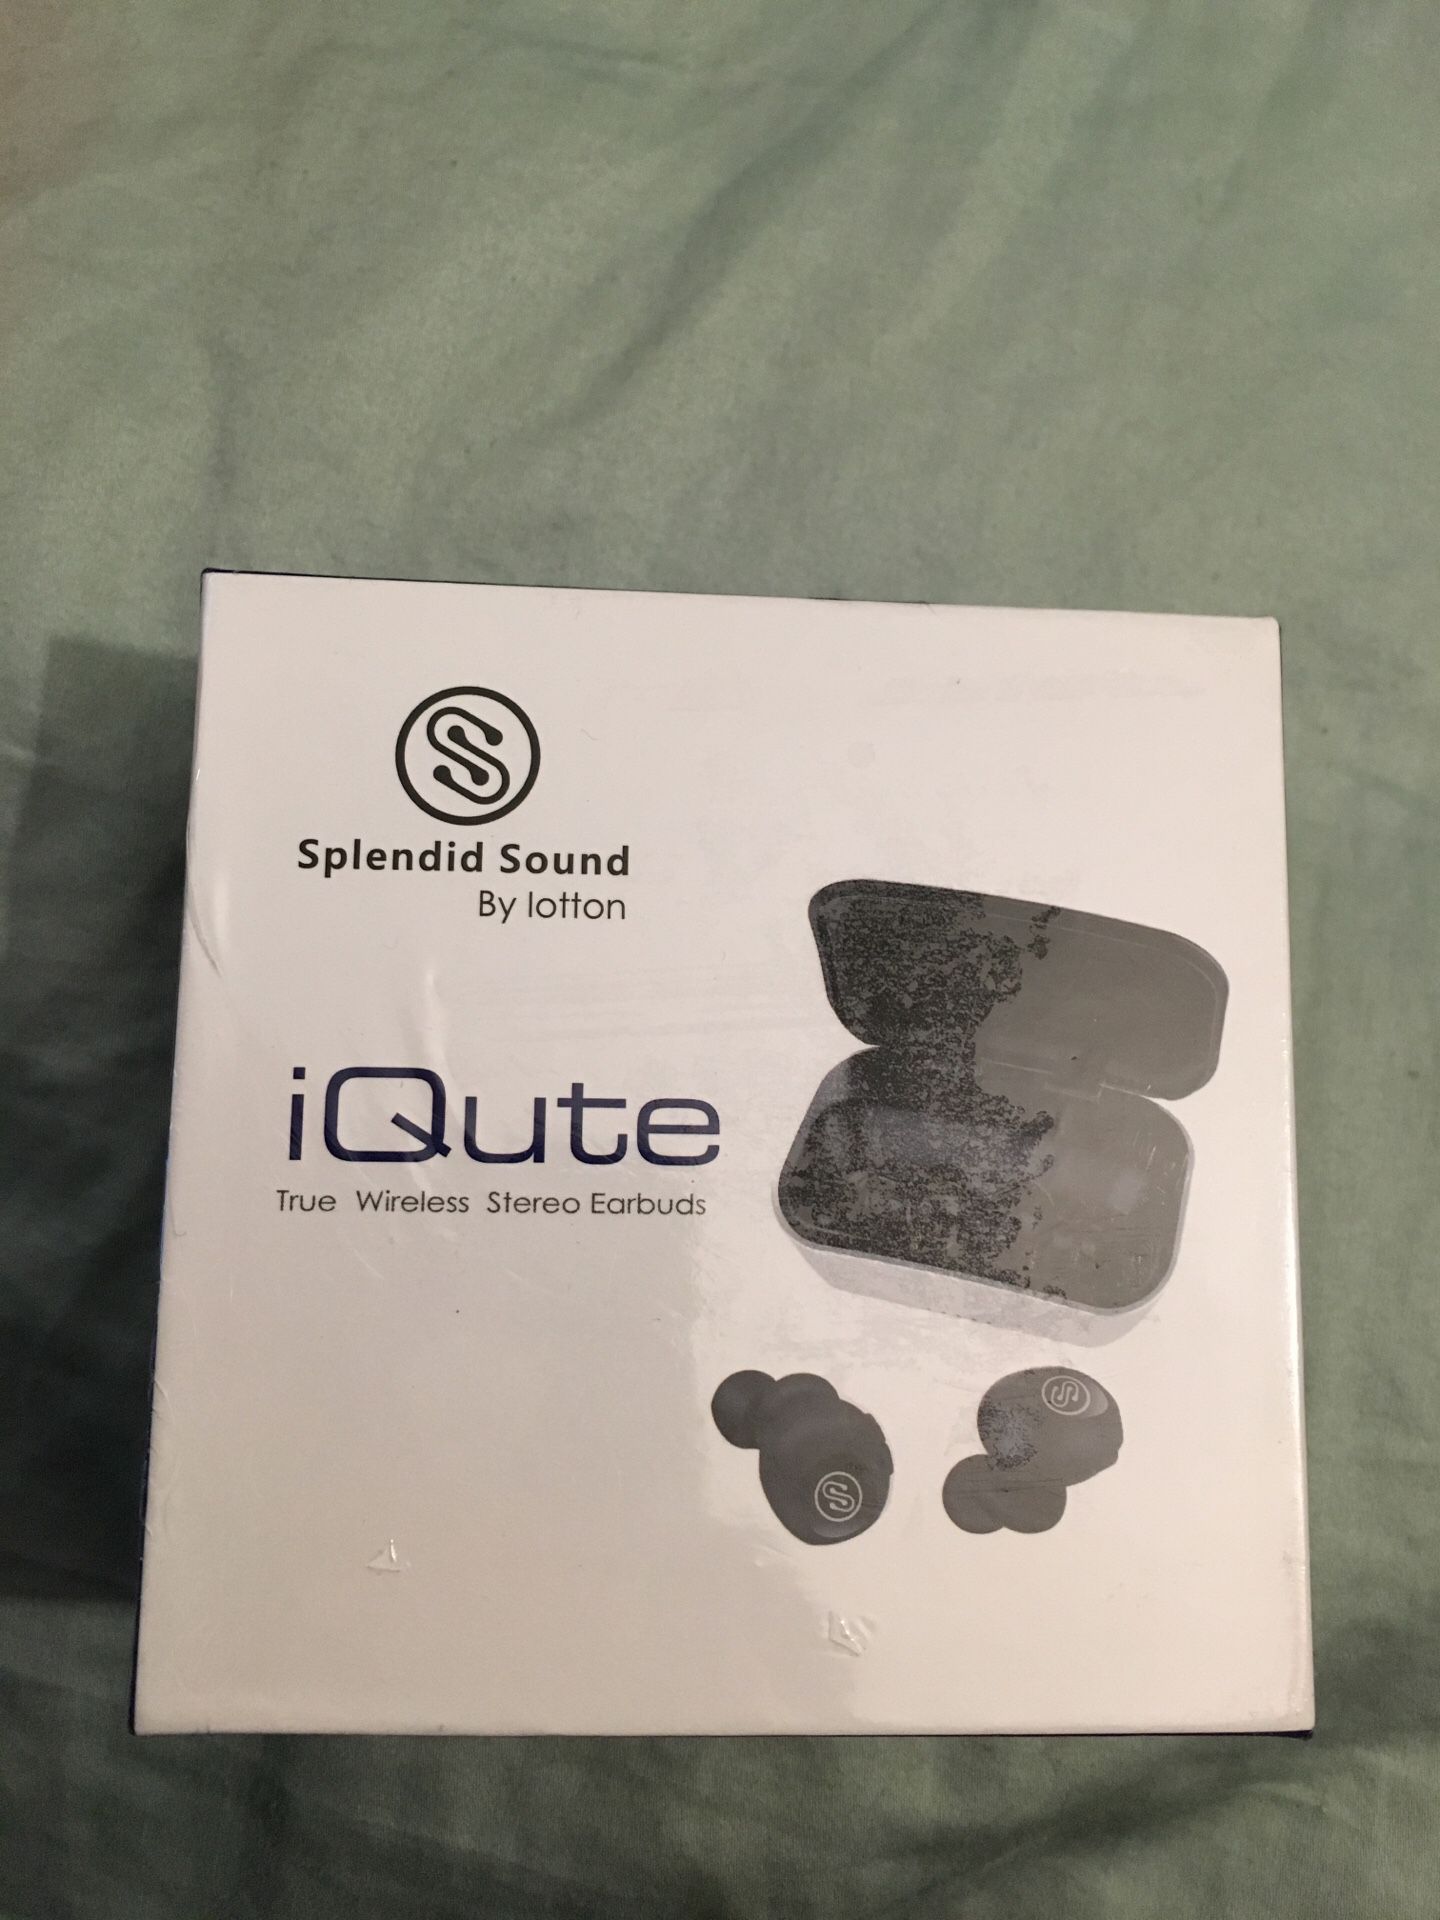 iQute Stereo Earbuds